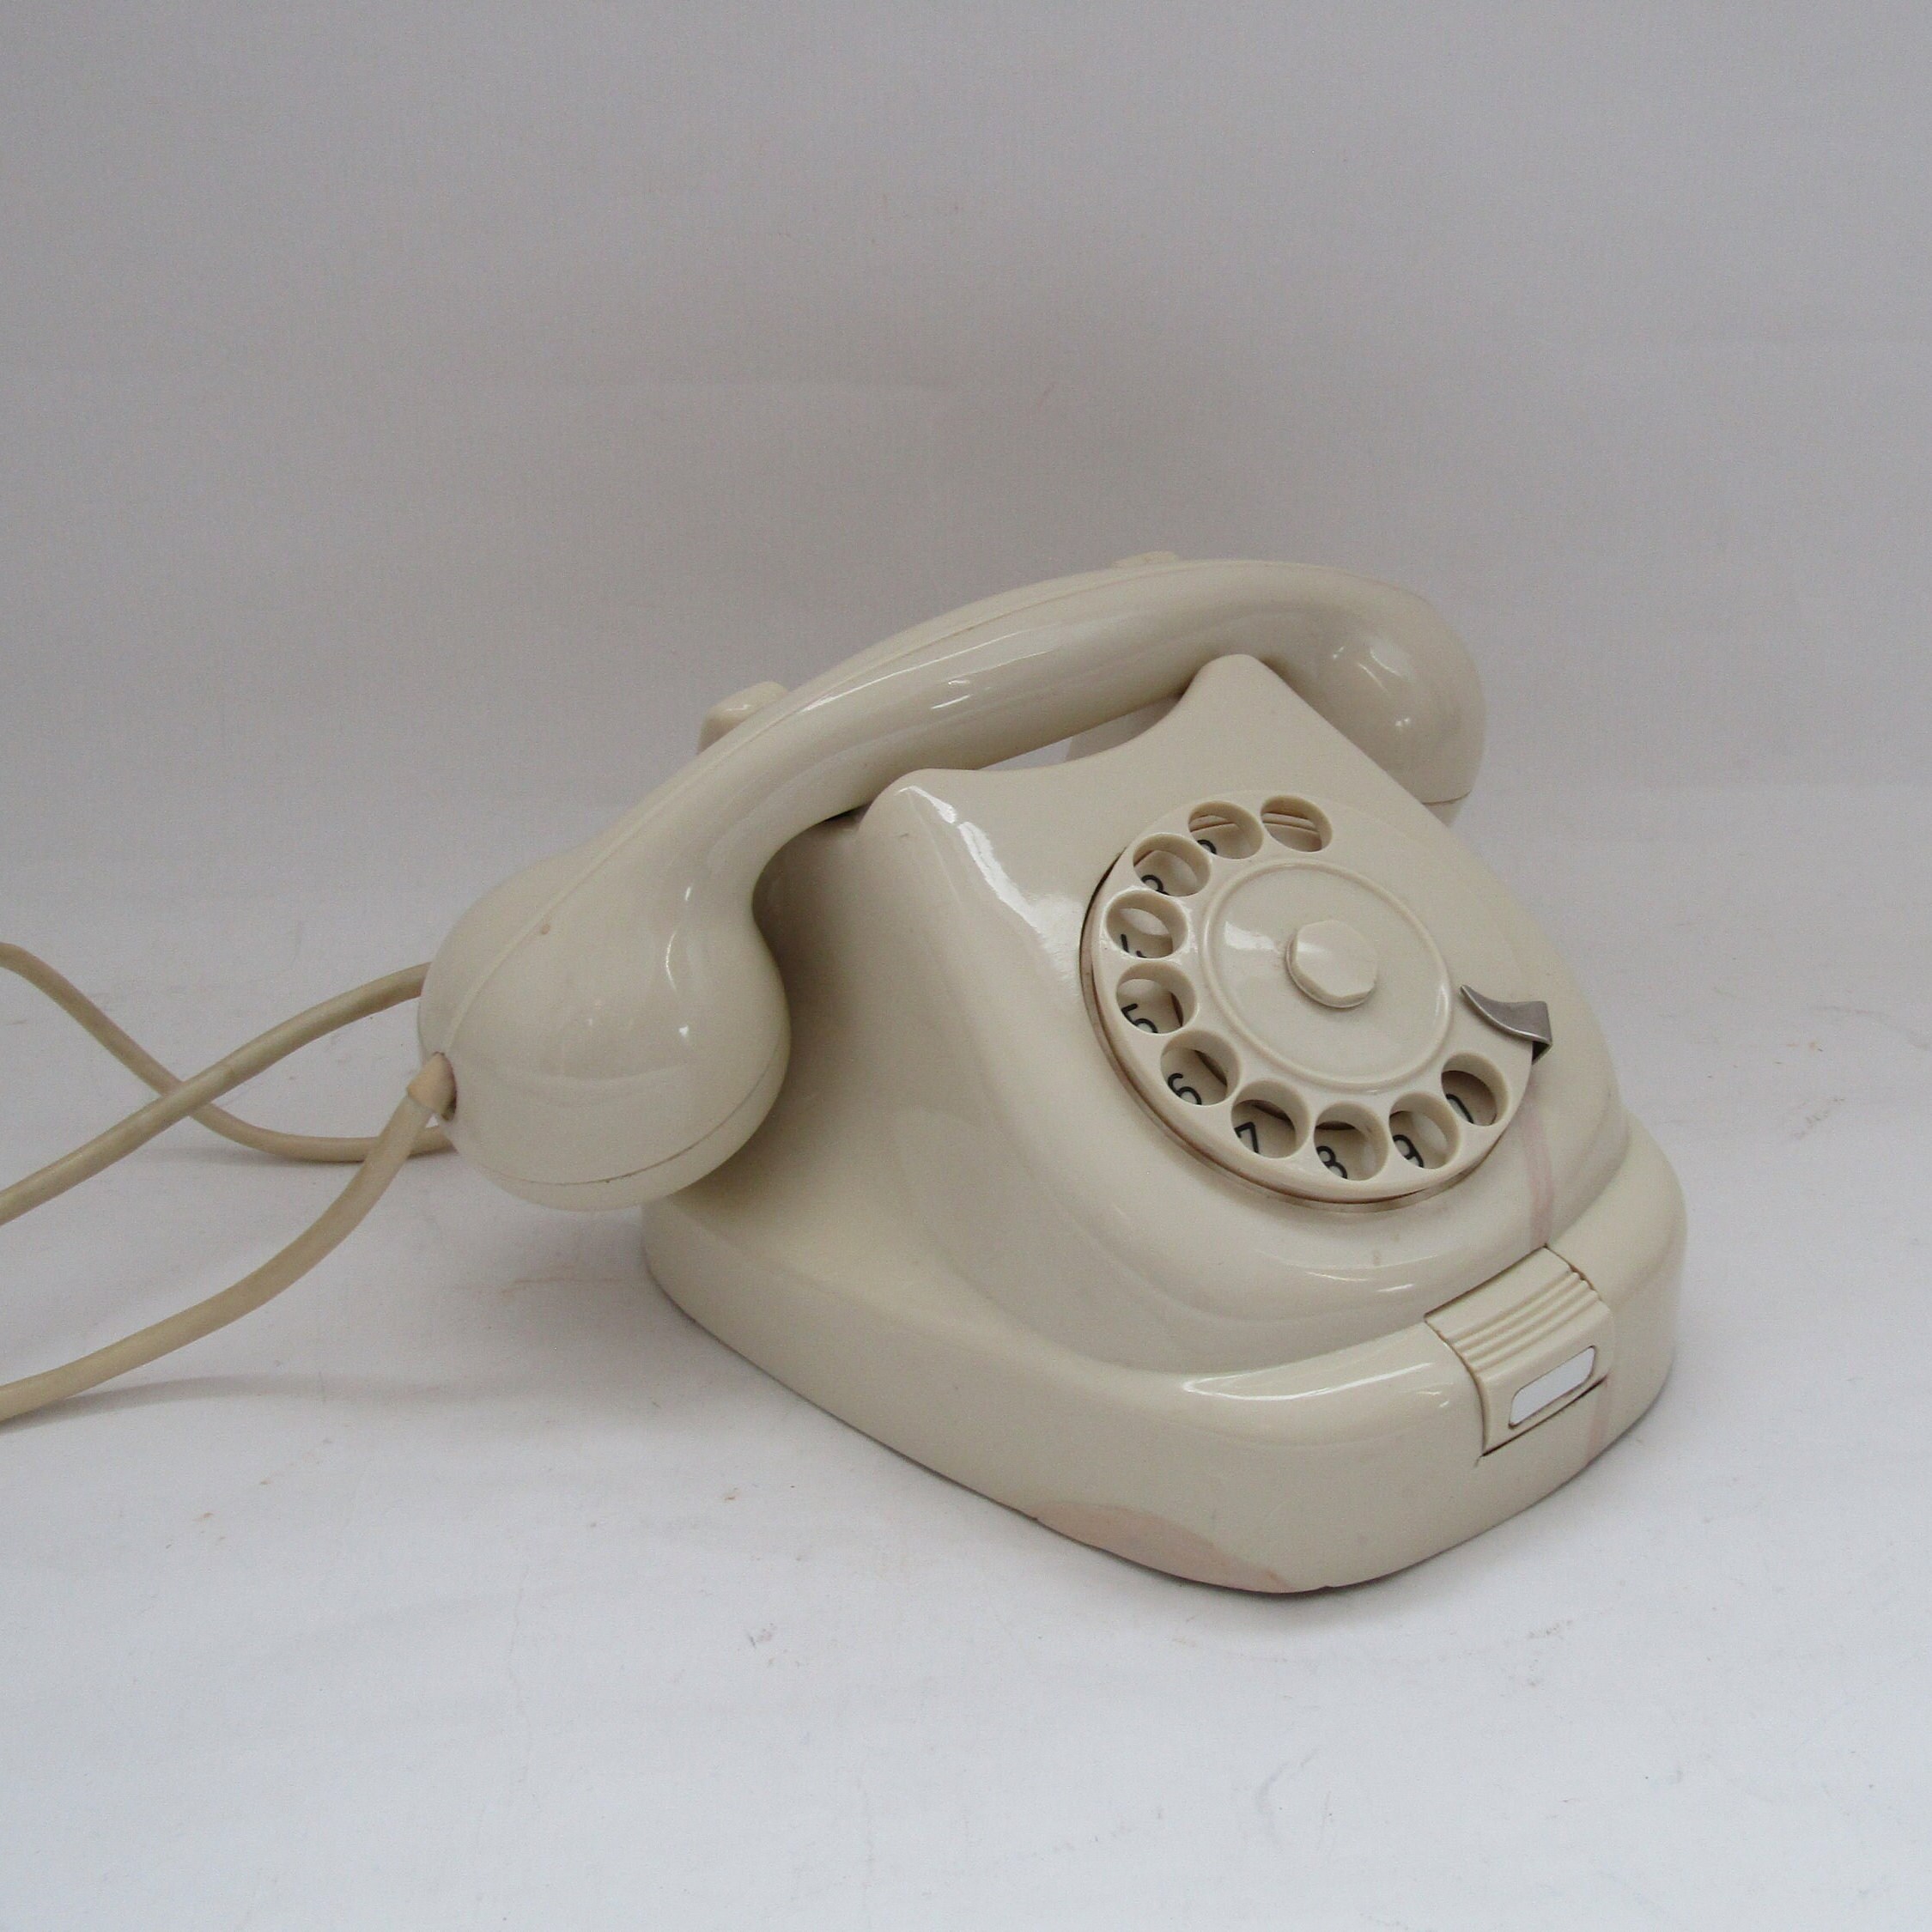 Details with a white old fashioned dial rotary phone from the